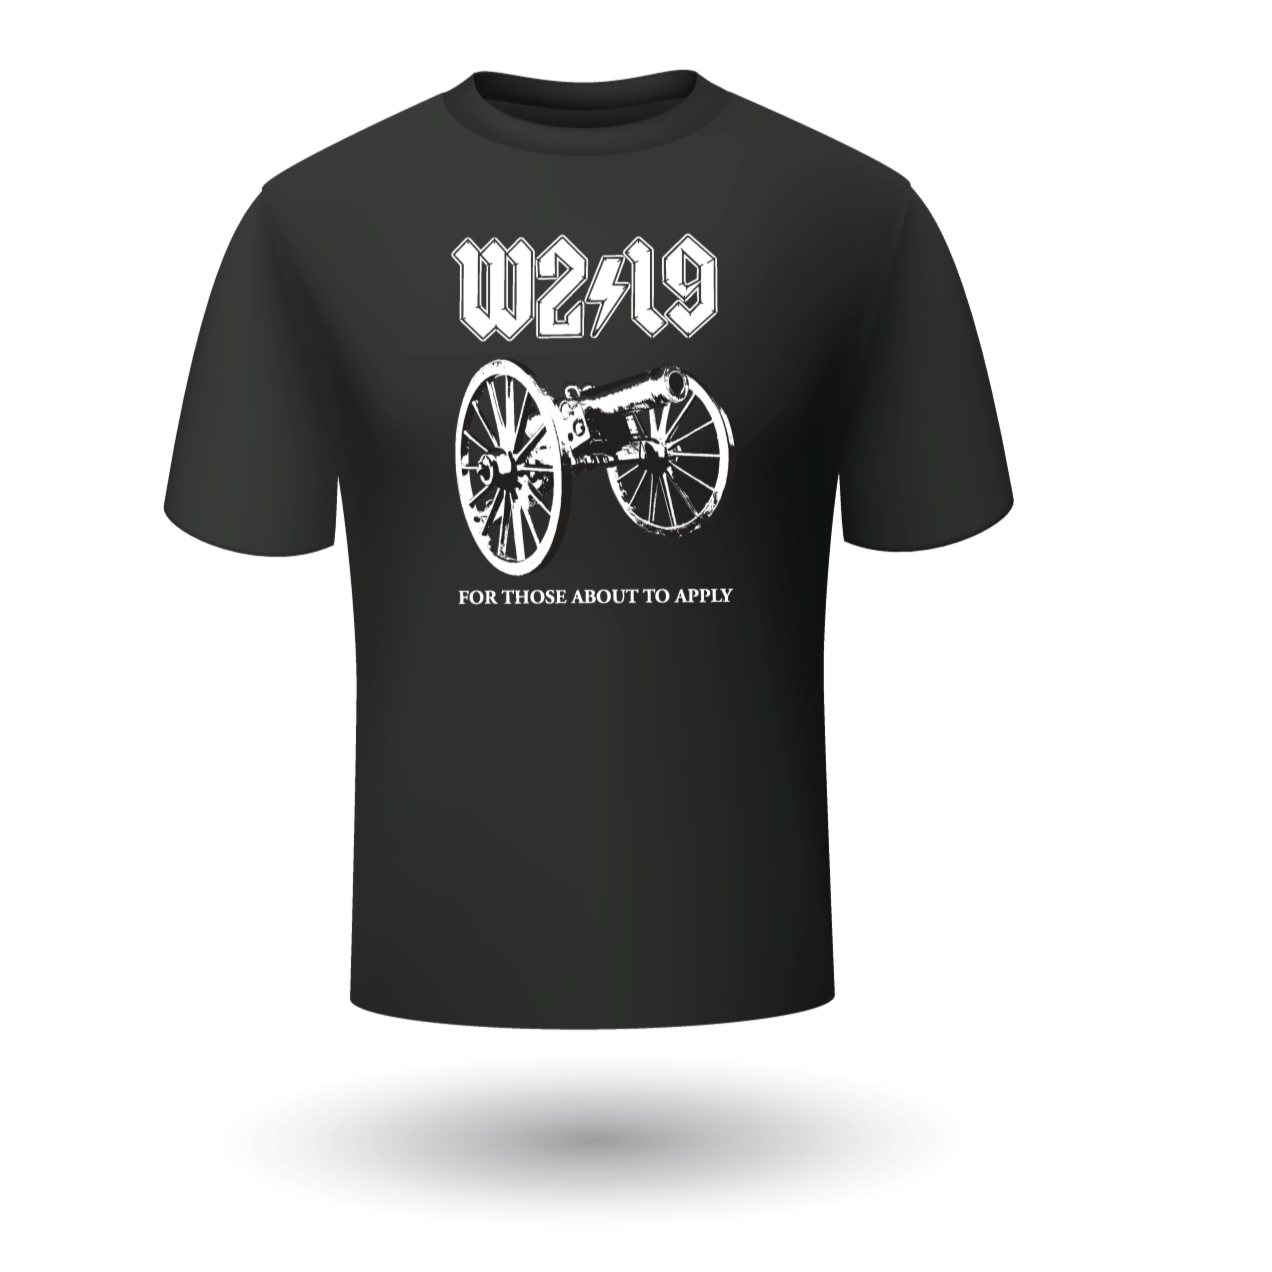 W2/19 For Those About To Apply | Black Short Sleeve T-Shirt